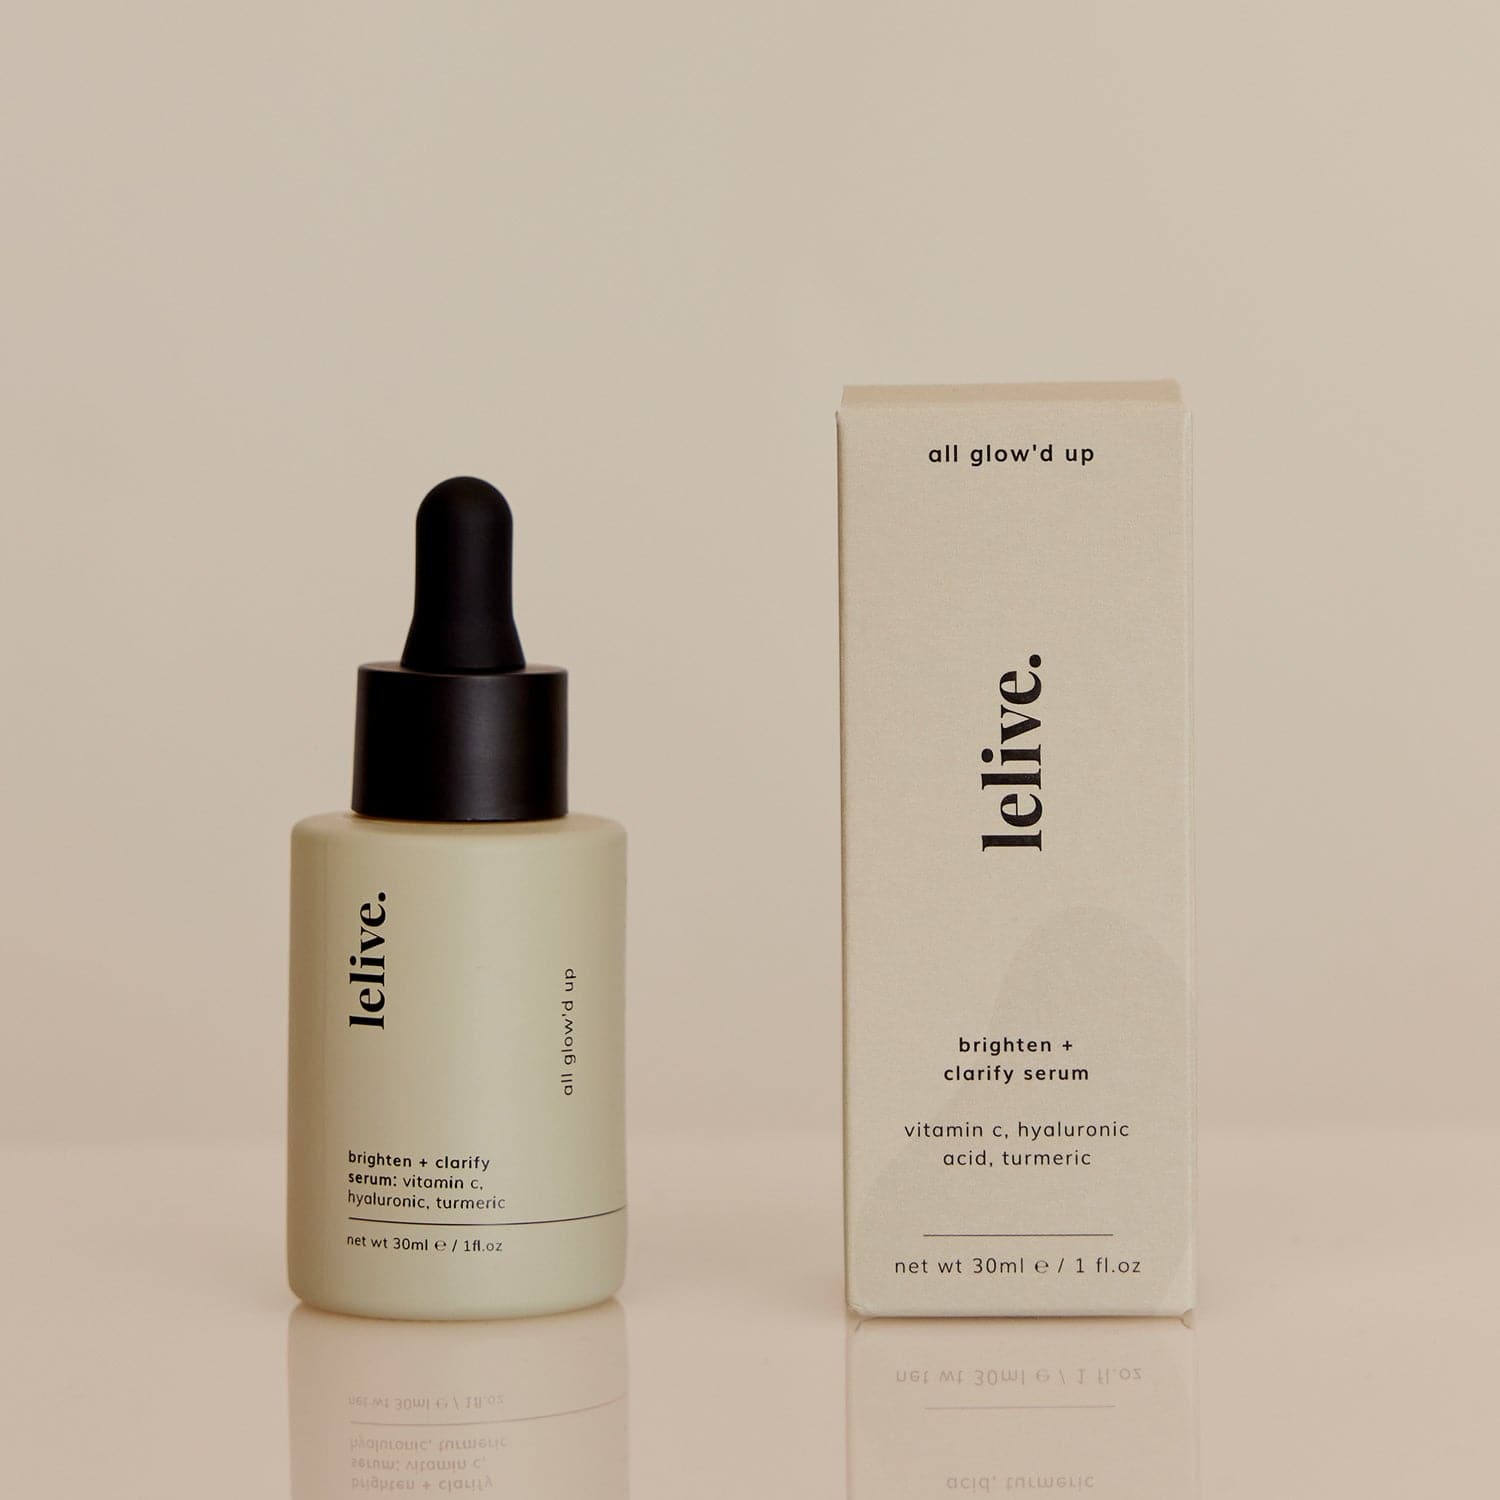 all glow'd up | brighten + clarify serum - lelive